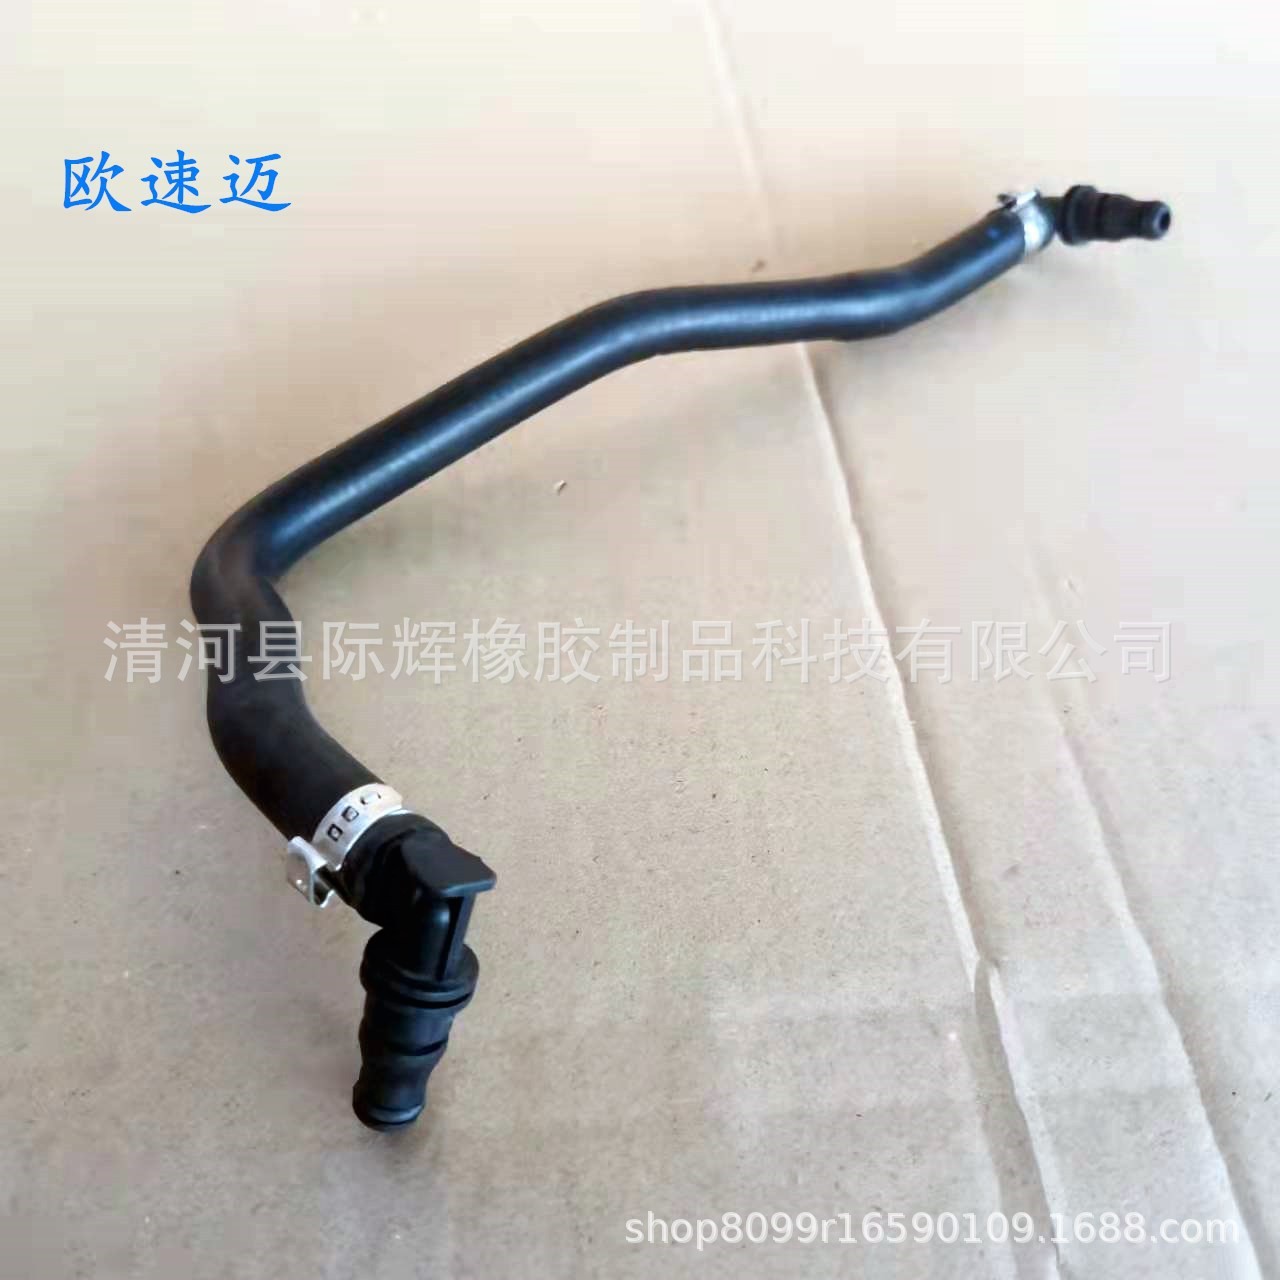 apply Benz kettle Water pipe W204 Automotive pipes Rubber tube 2045010925